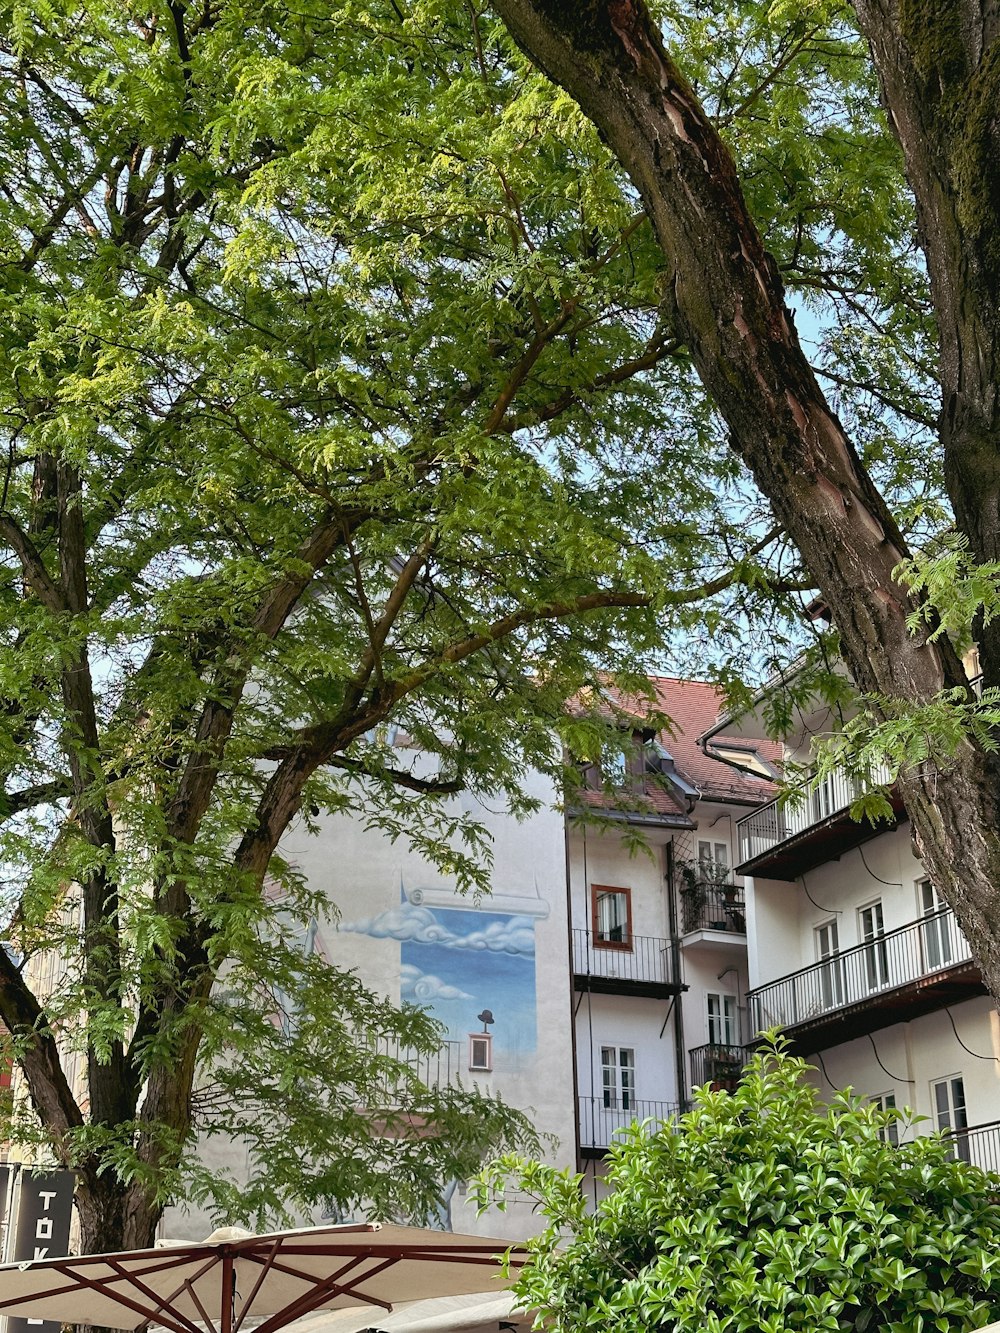 a bench under a tree in front of a building